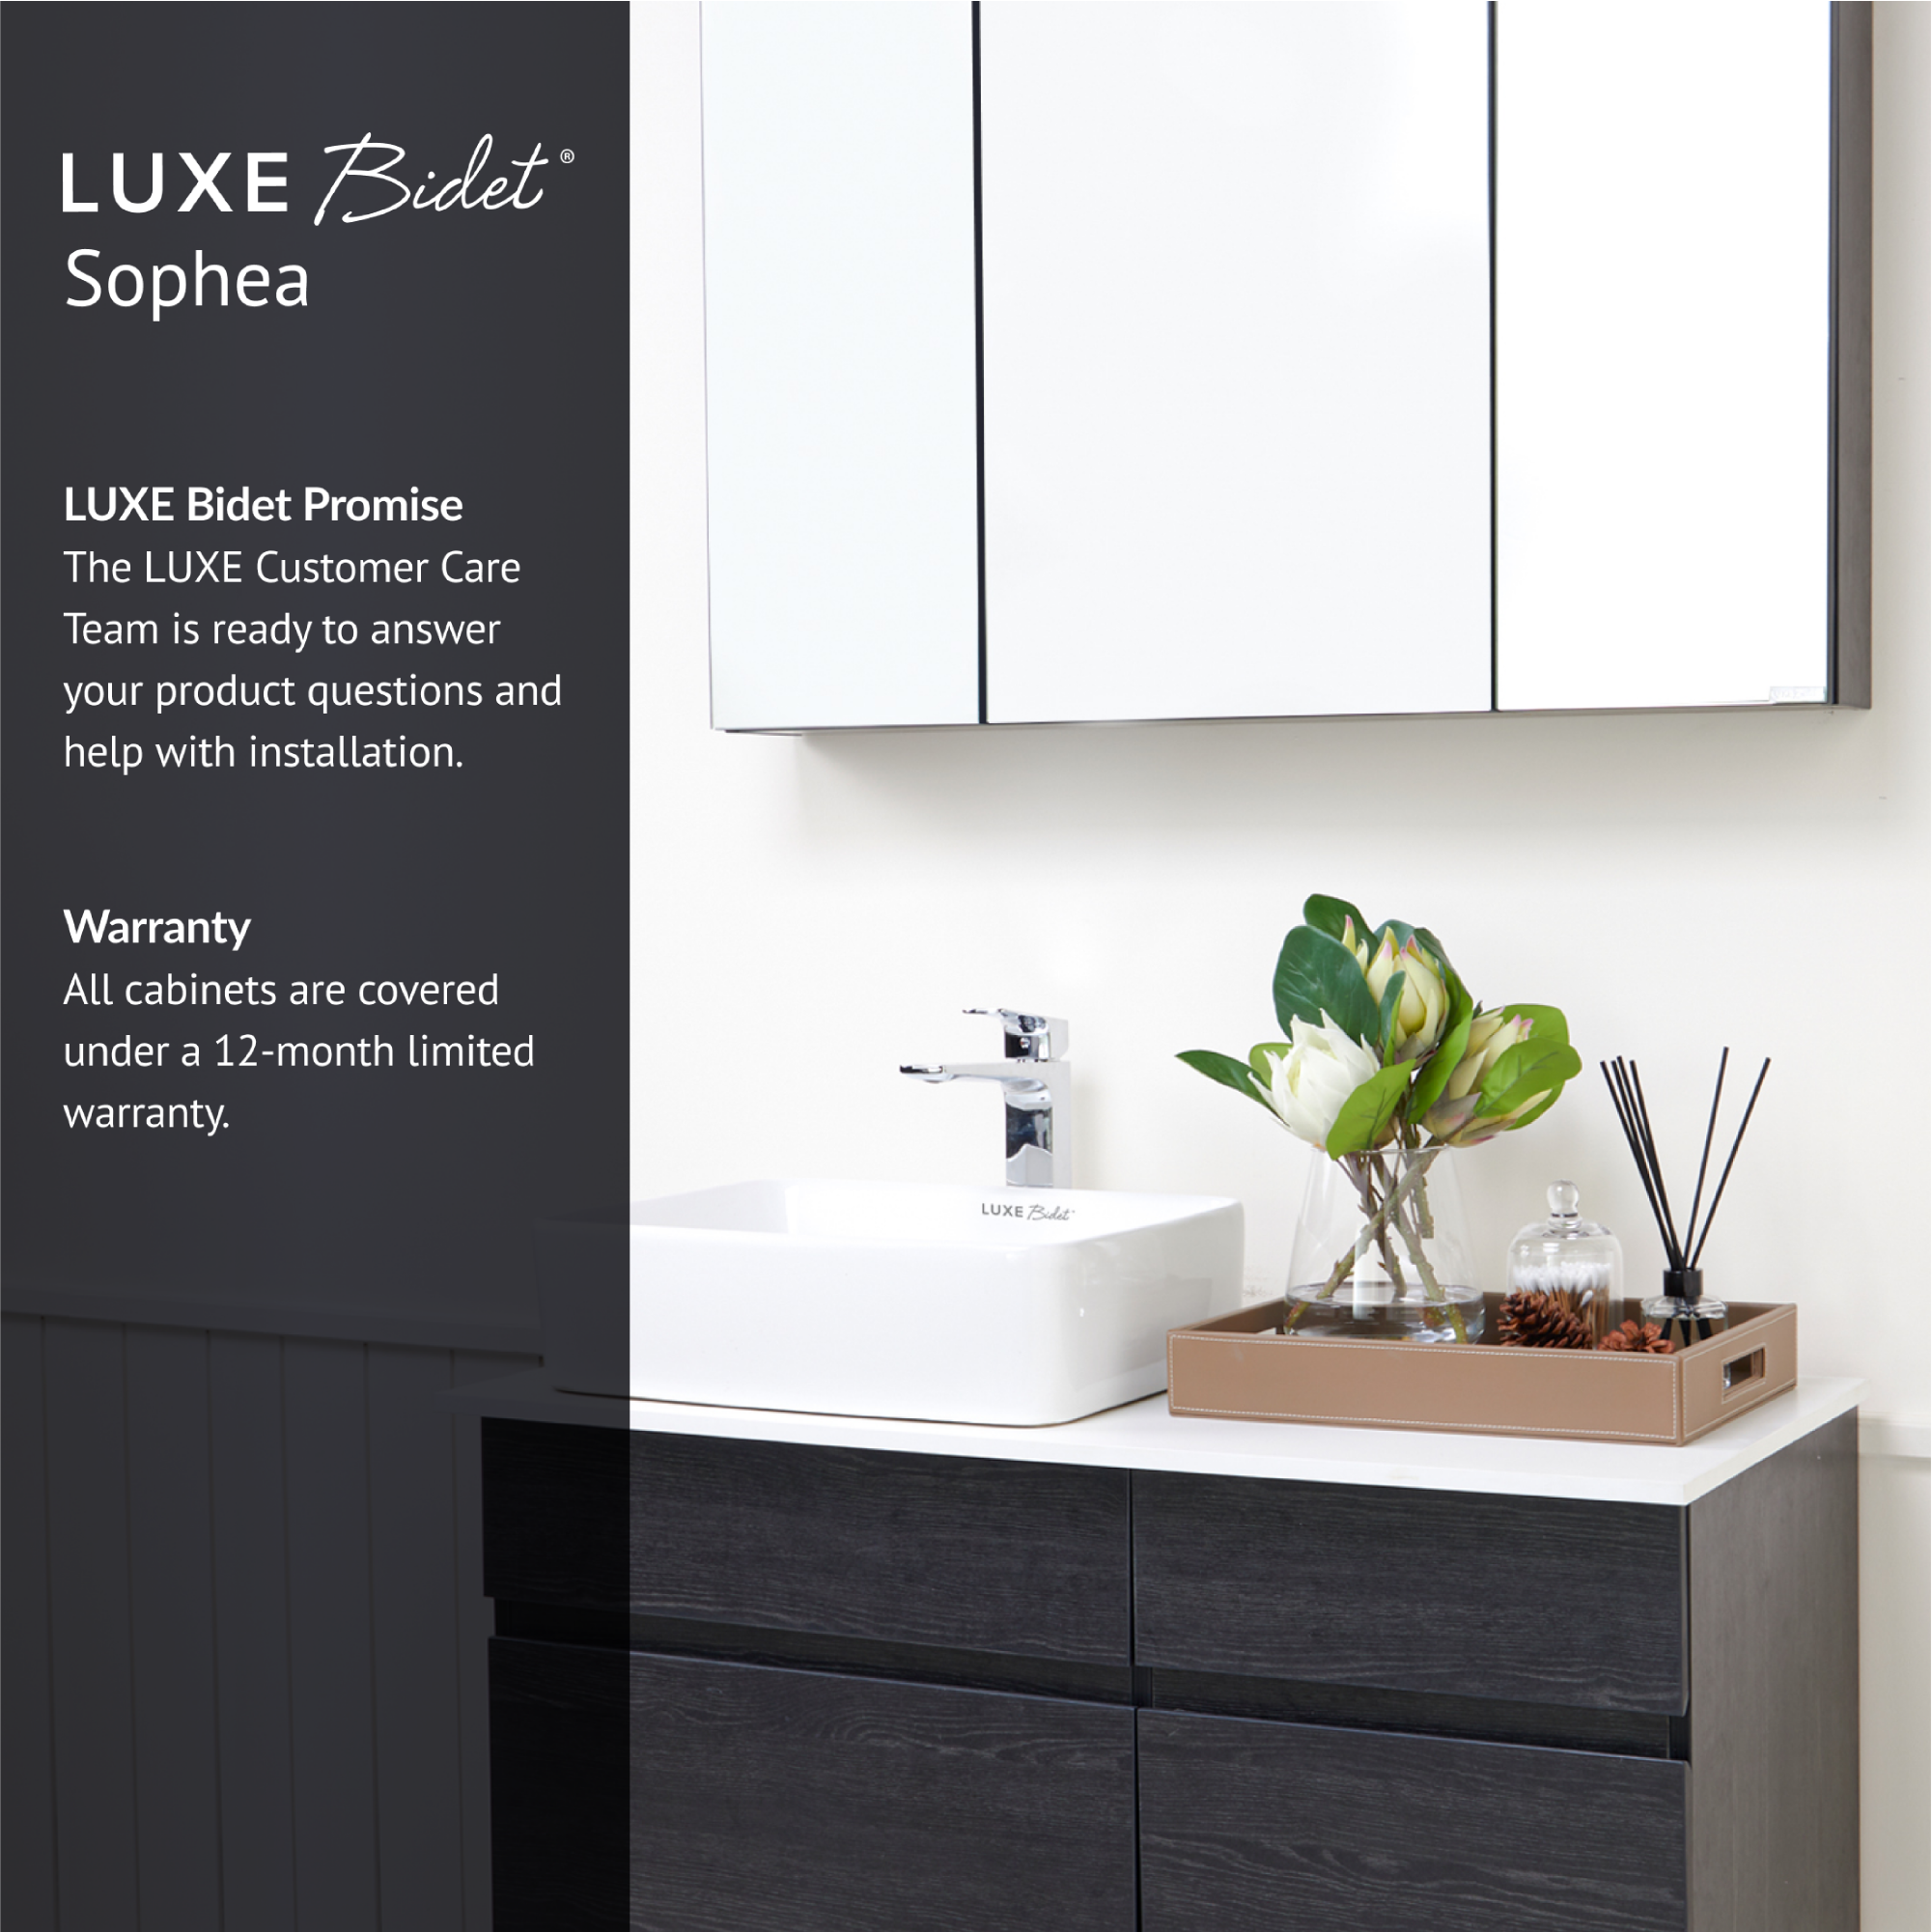 Sophea Bathroom Vanity Set is backed by the LUXE Bidet Promise and comes with a 12-month limited warranty.